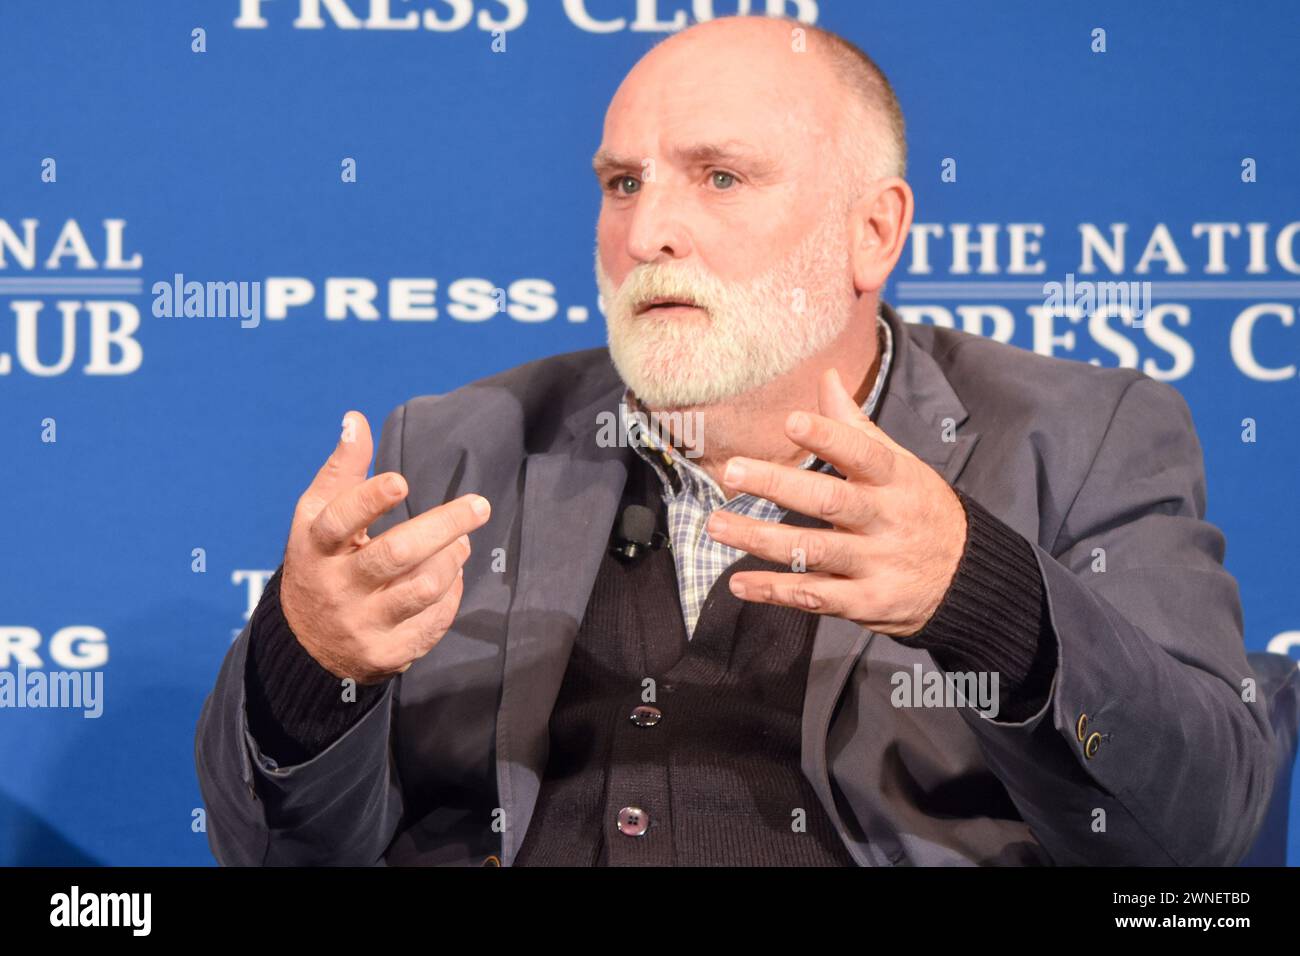 José Andrés, founder of World Central Kitchen, speaks at the National Press Club in Washington, D.C. 1 Mar. 2024 Stock Photo